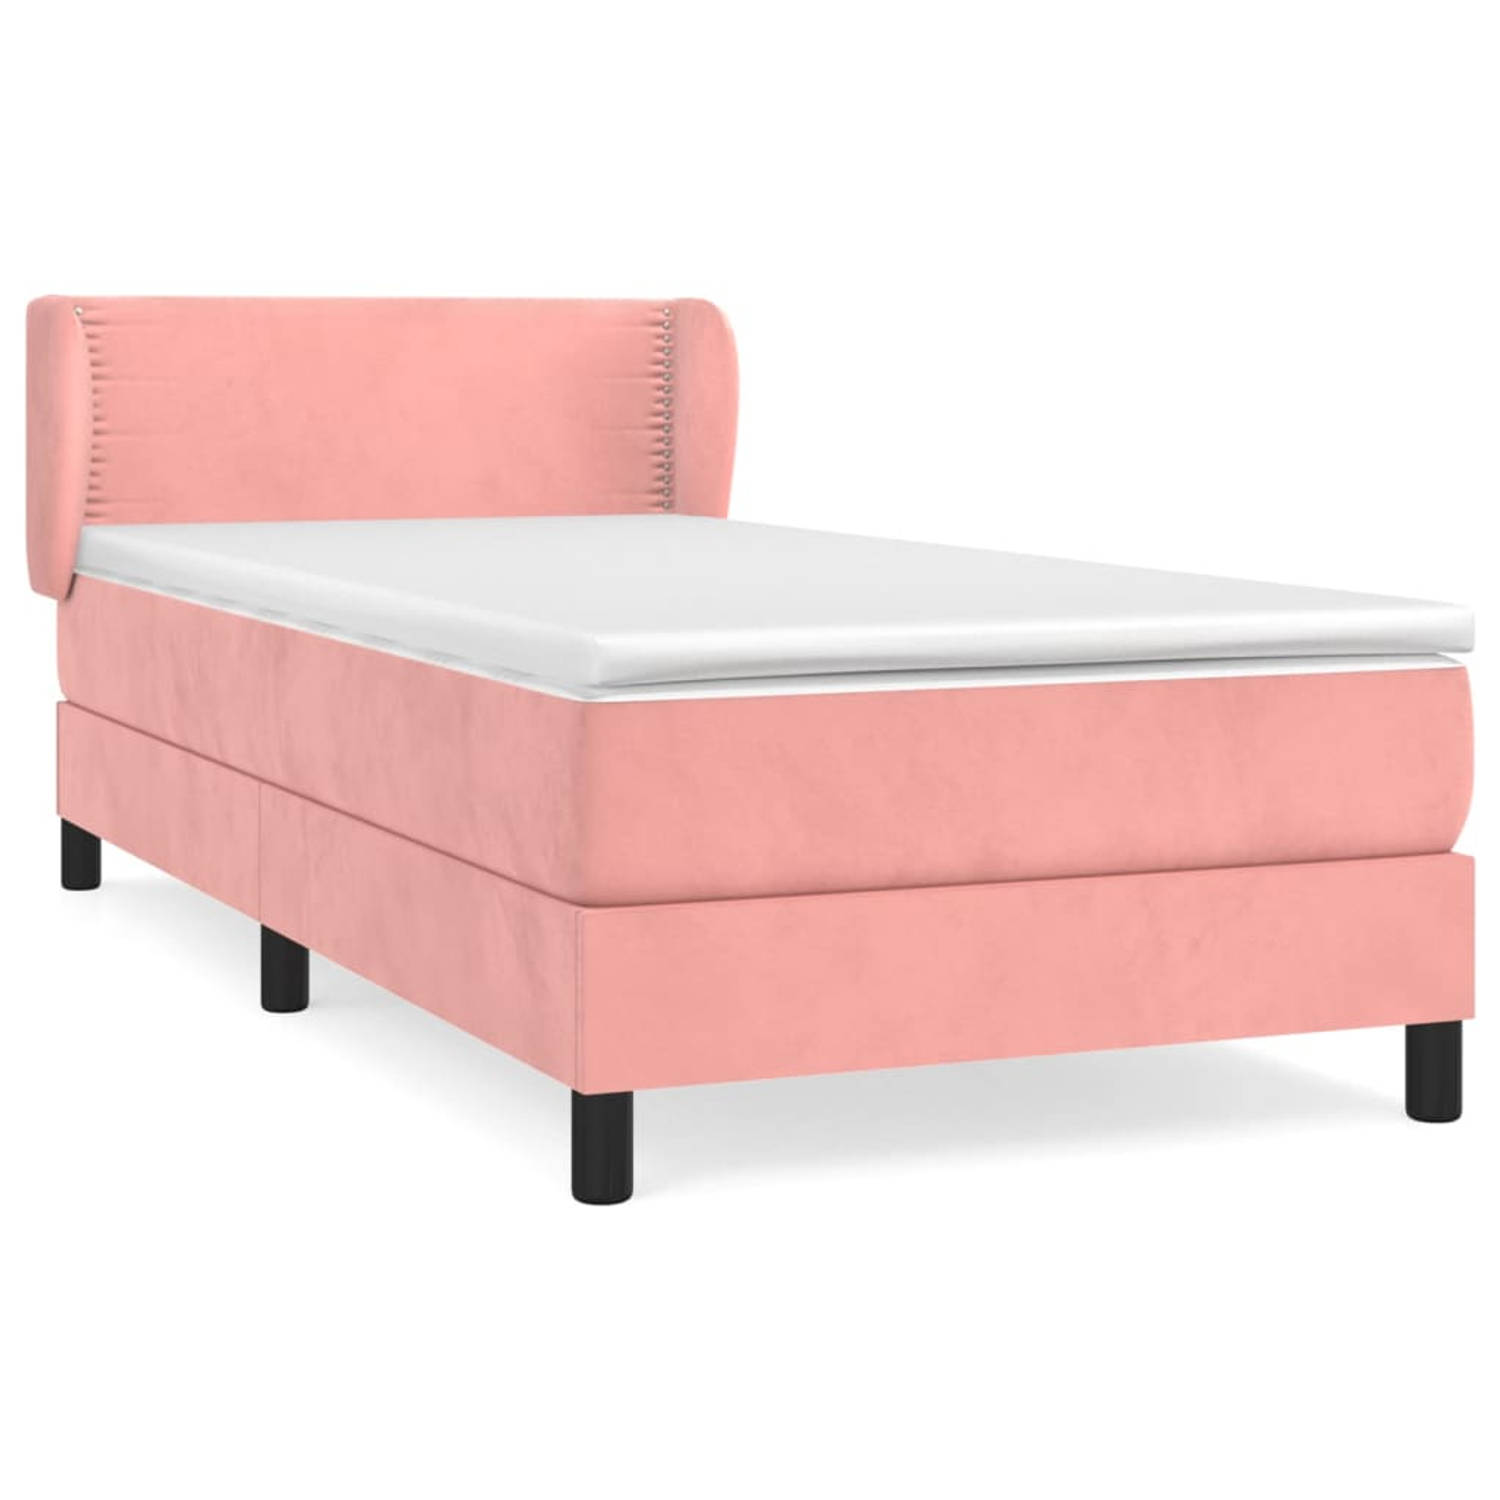 The Living Store Boxspringbed - fluweel - 203x93x78/88 cm - roze